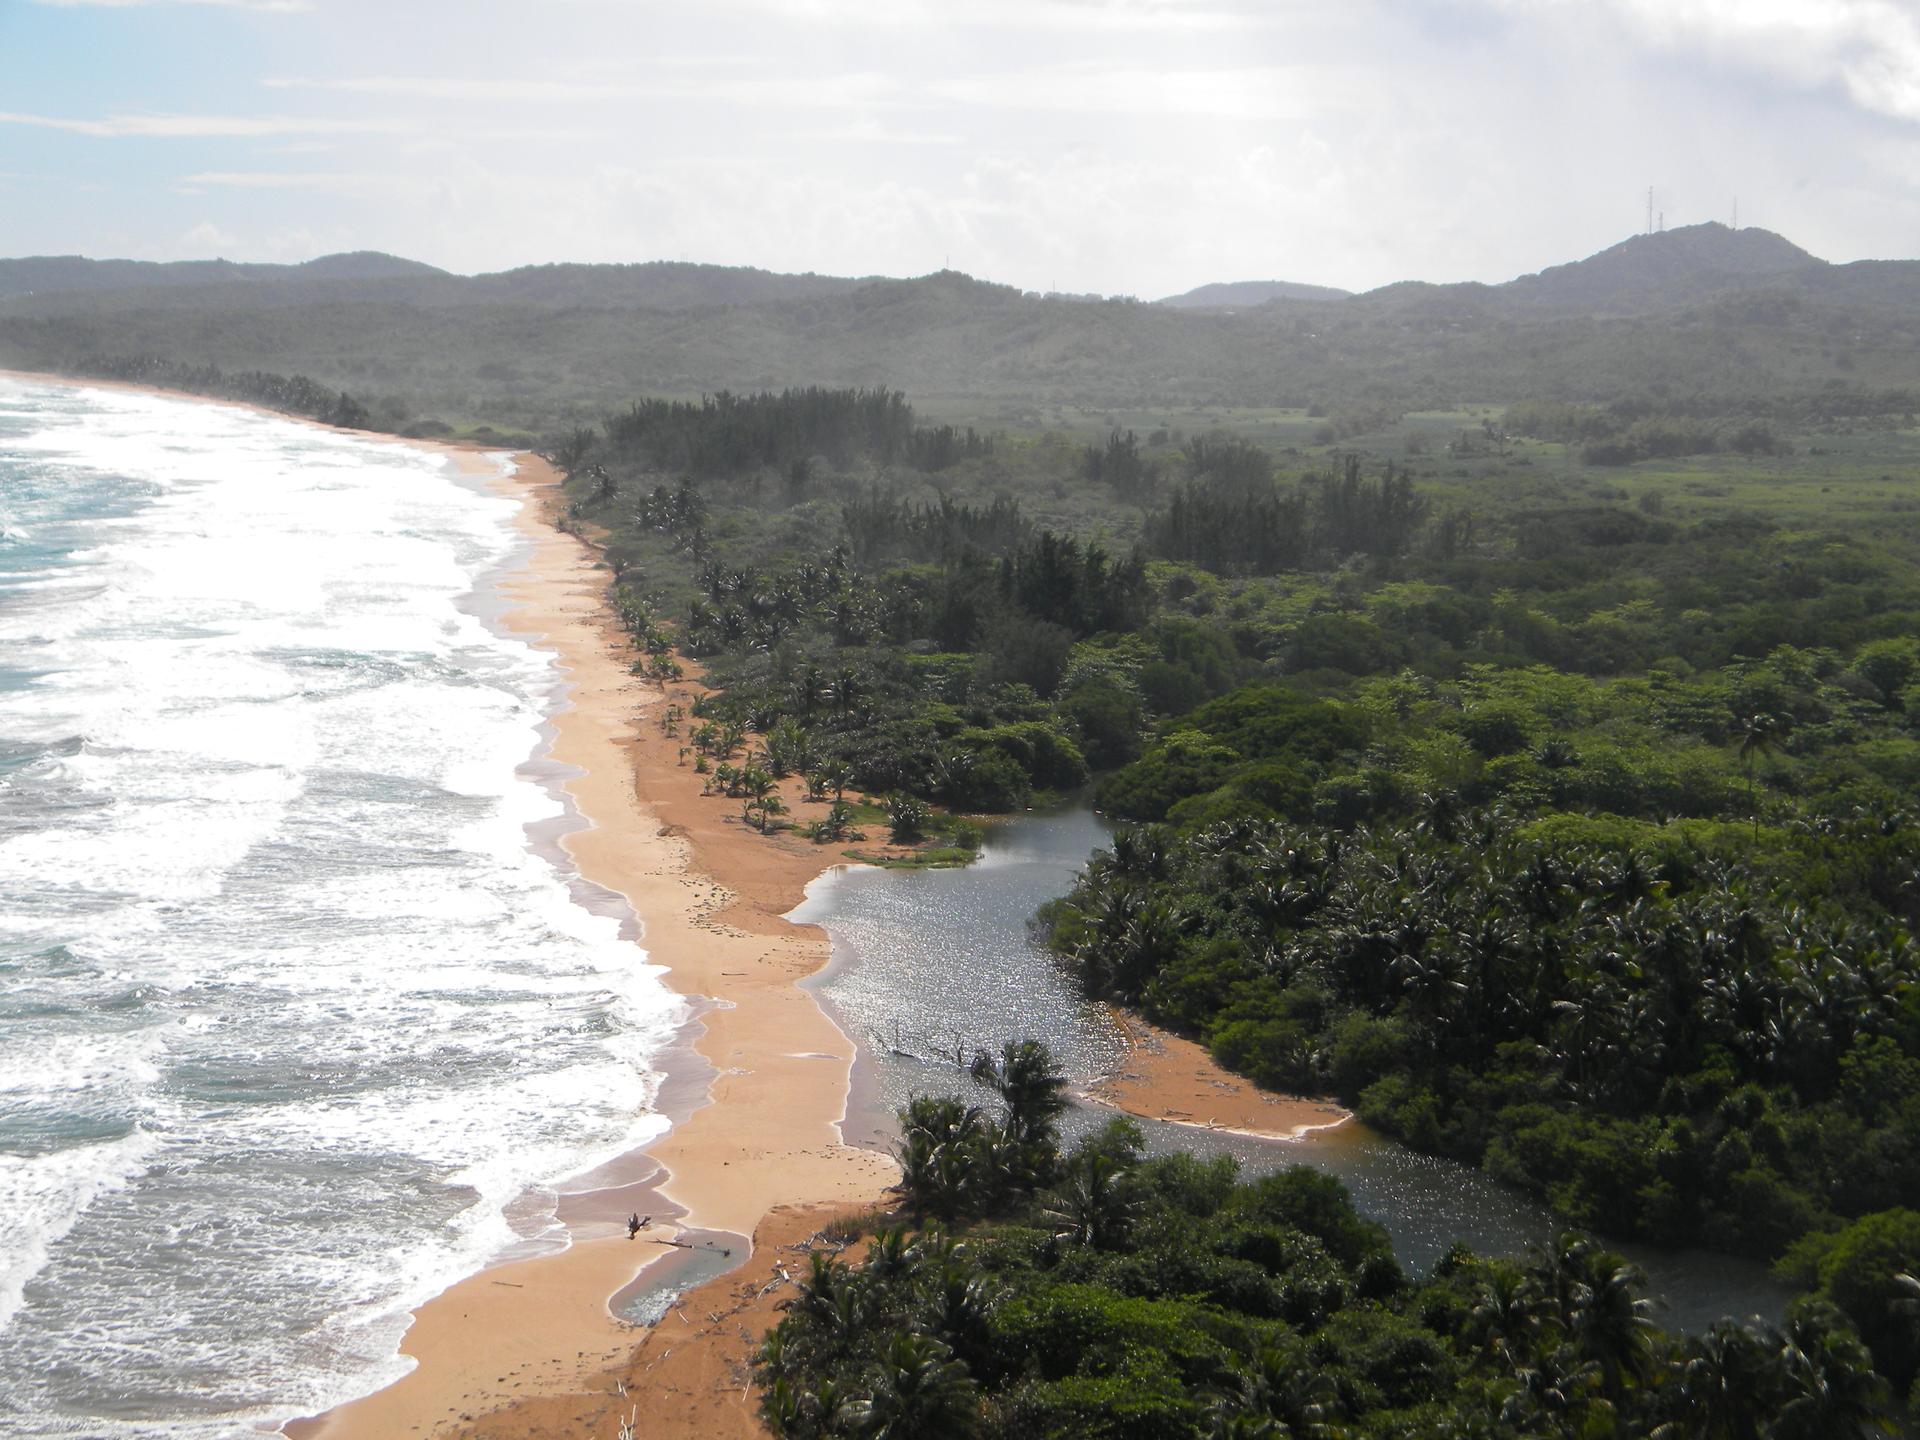 The Northeast Ecological Corridor covers 3,000 acres of prime oceanfront property on Puerto Rico's northern coast. In addition to its scenic and recreational value, it has enormous bilogical significance as a primary nesting ground for the endangered leat